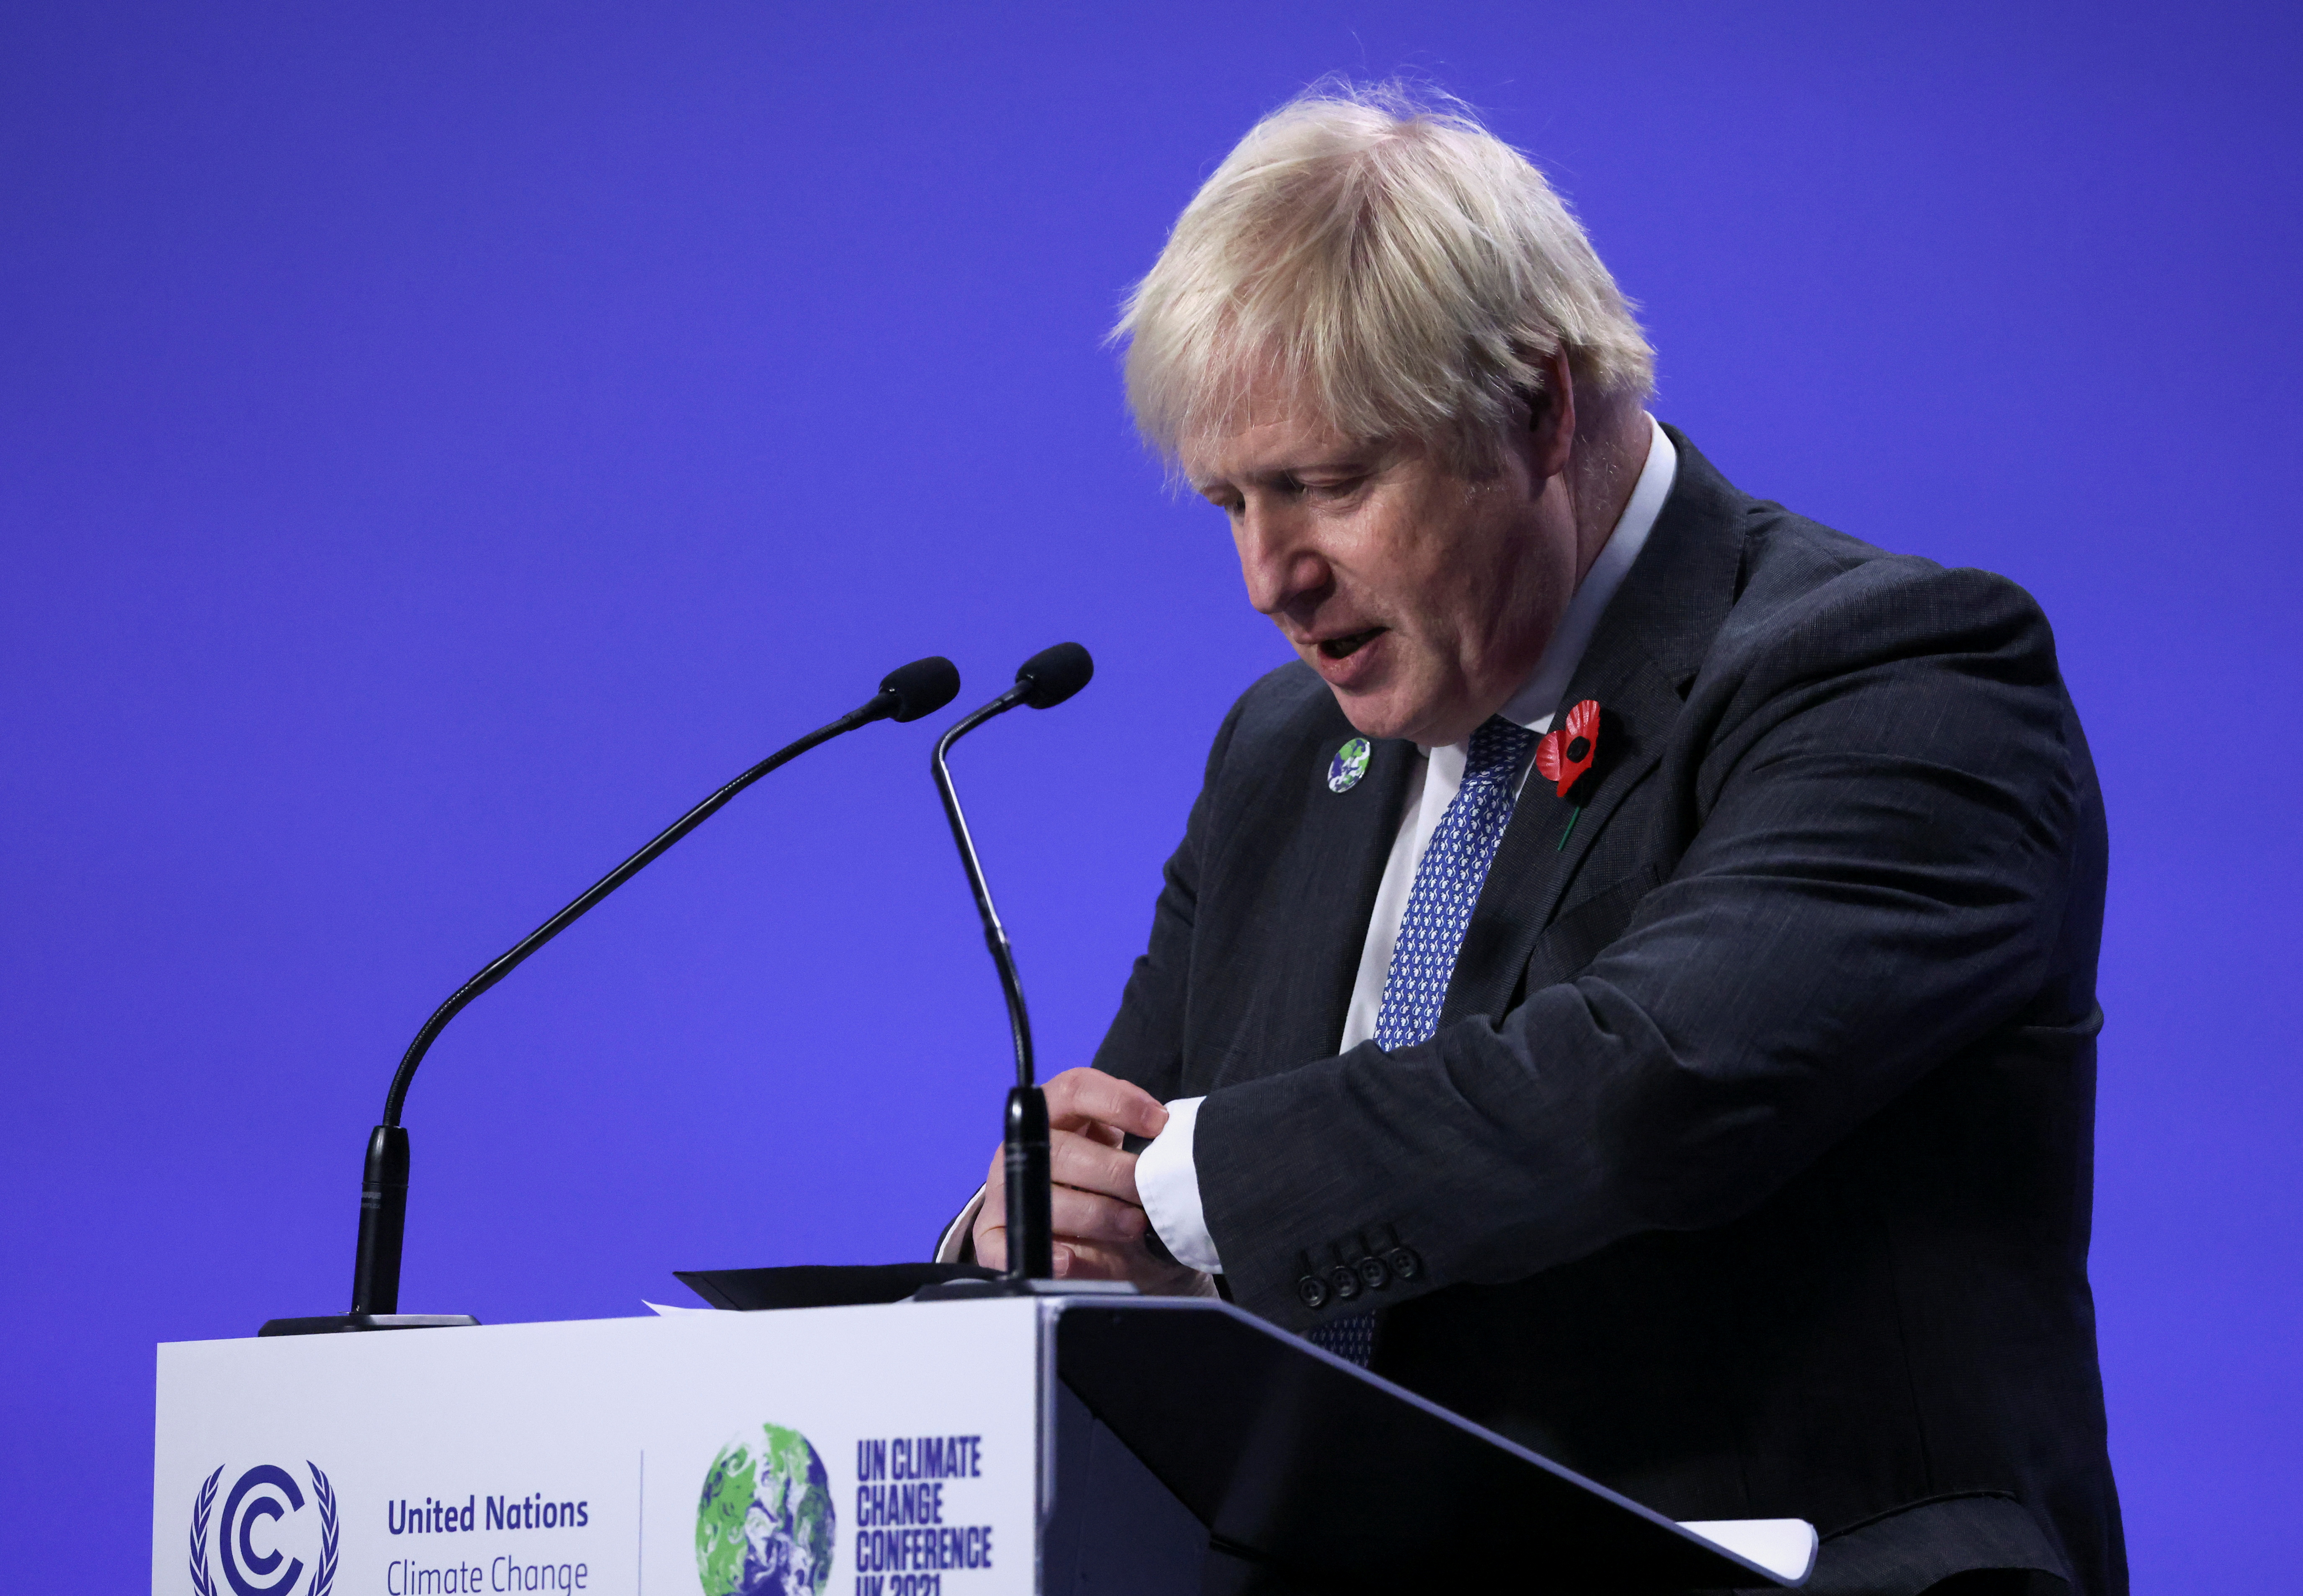 Britain's Prime Minister Boris Johnson looks at his watch while he holds a news conference during the UN Climate Change Conference (COP26) in Glasgow, Scotland, Britain, November 10, 2021. REUTERS/Yves Herman